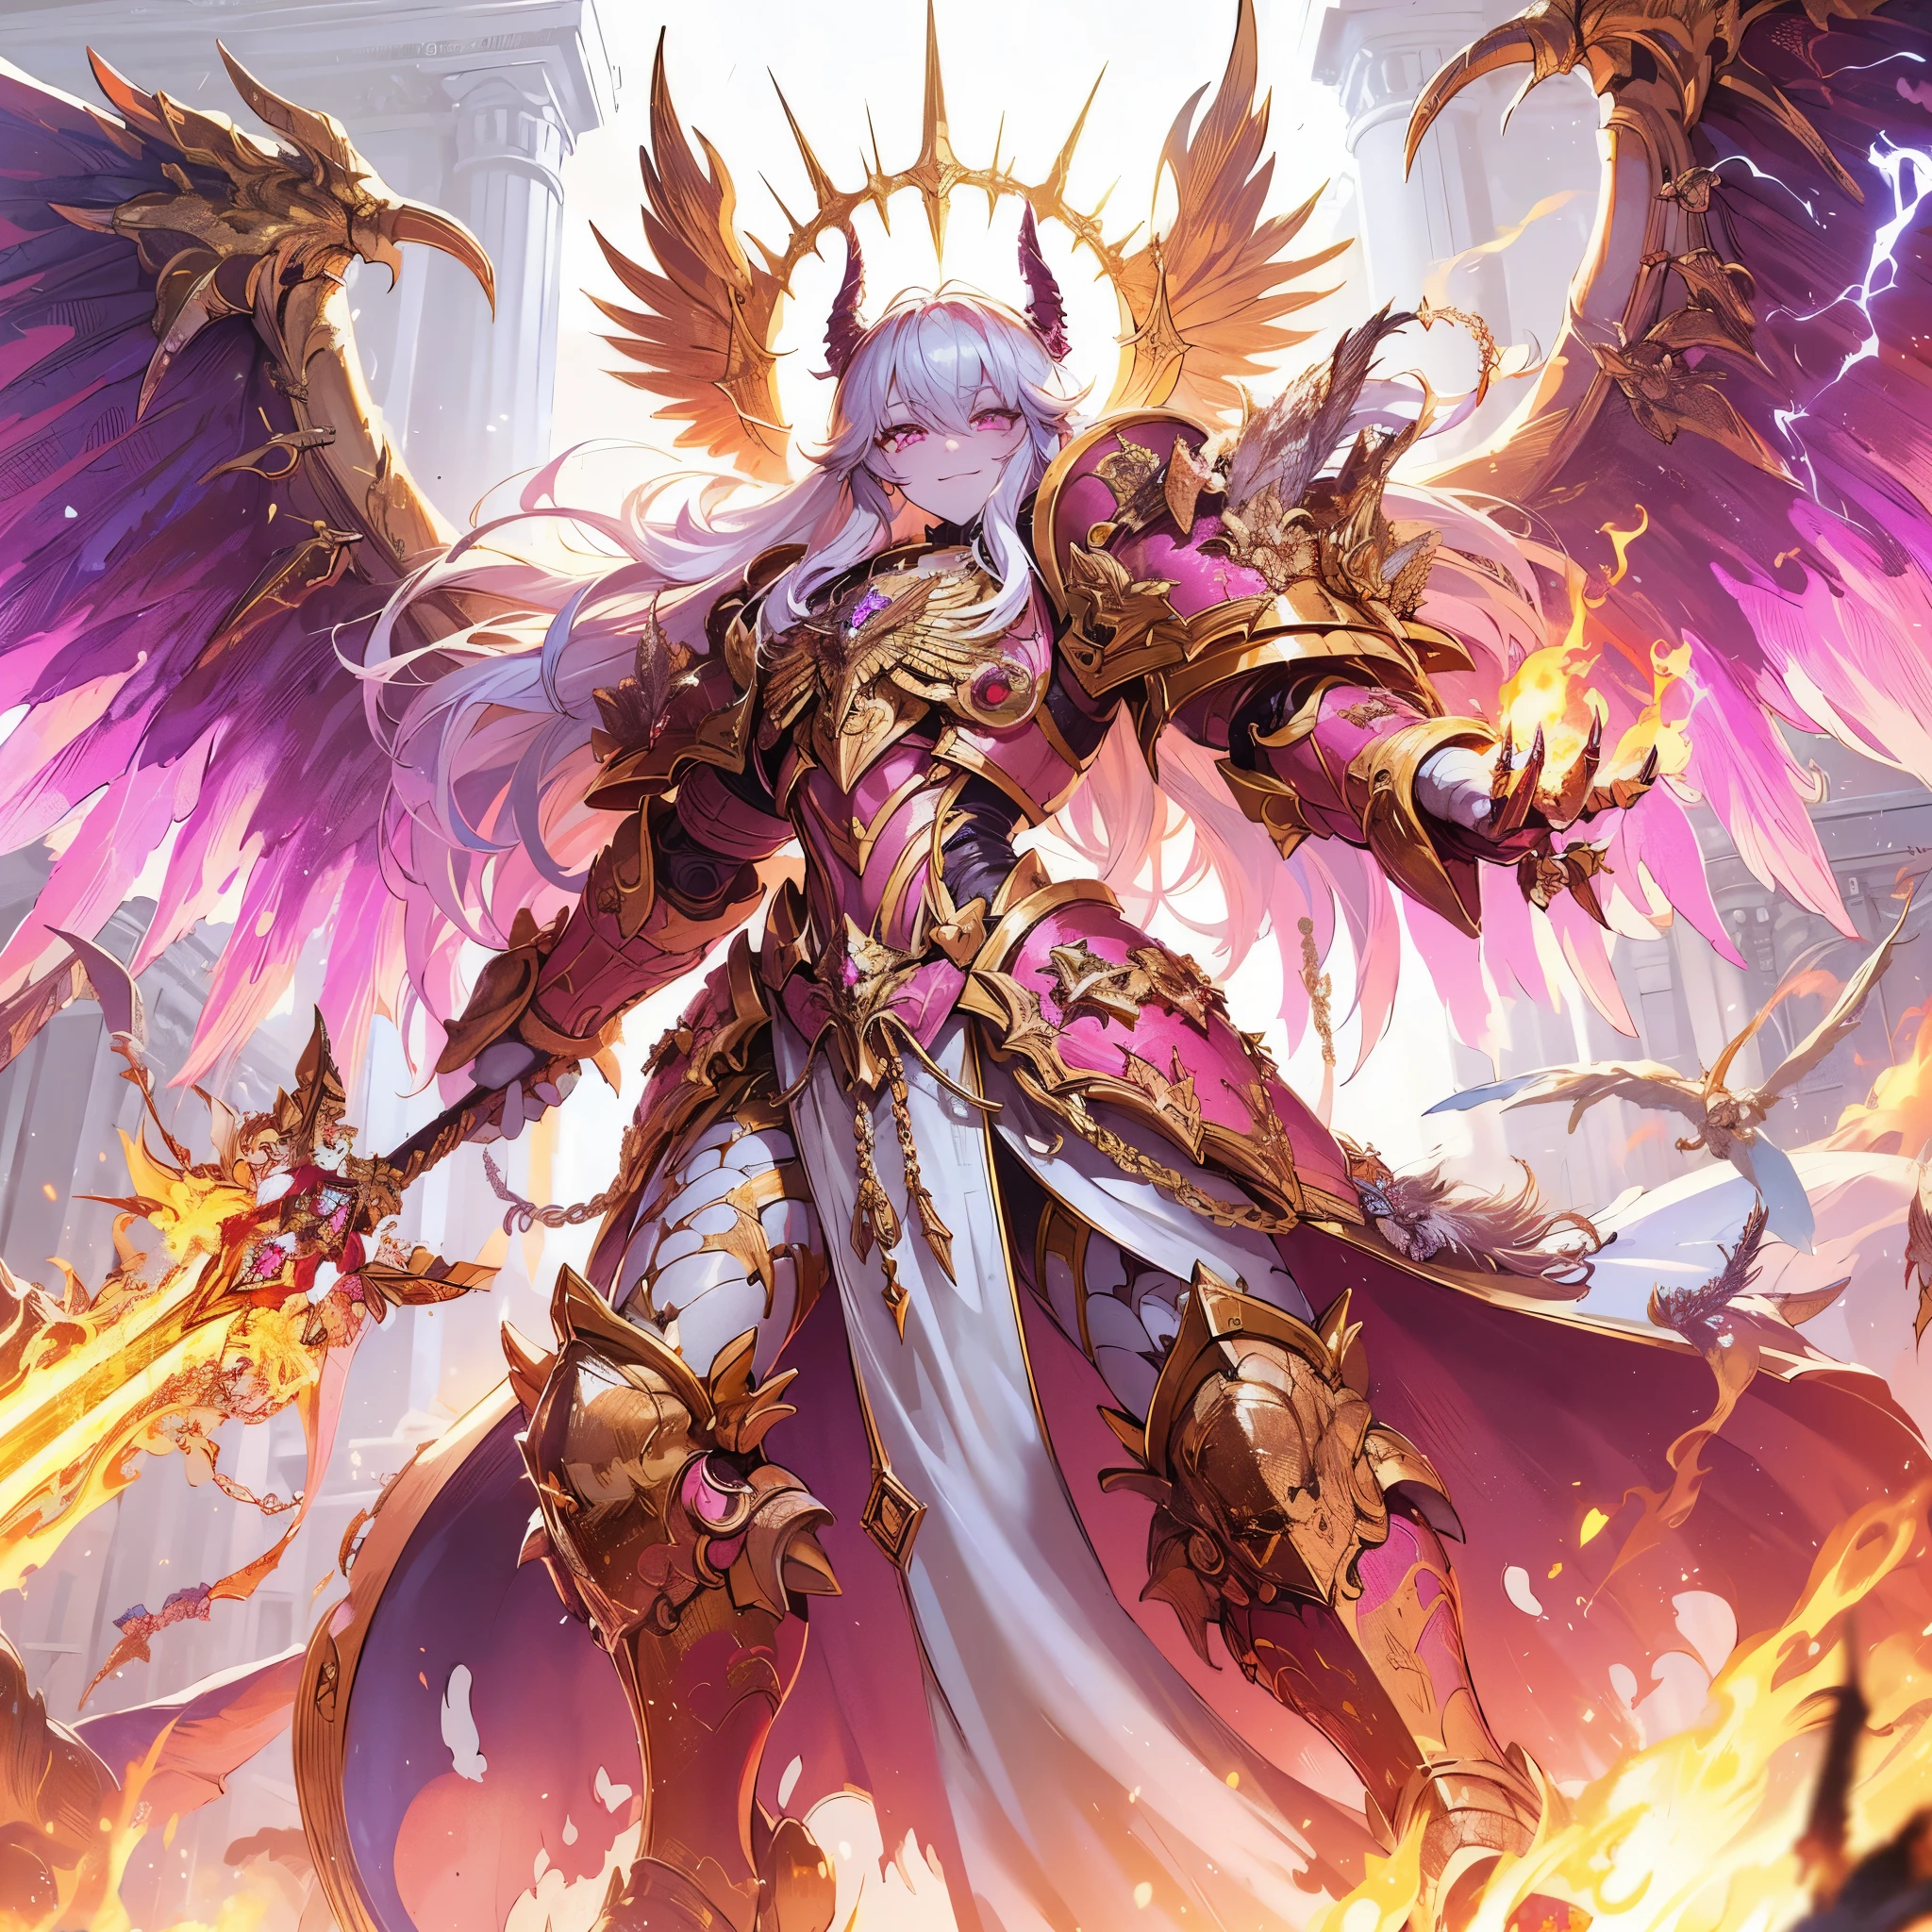 Masterpiece, best quality, ultra-detailed, anime style, full body of Chaos Demon girl, Gorgeous power armor, with golden sword and golden spear,Eagle wings,pink and purple fur and kicking claws, supernatural Lightning and flame, Warhammer 40K, ((Eight-pointed star symbol)), 8k high resolution, trending art station, white background, whole body, standing on palace, winning smile
